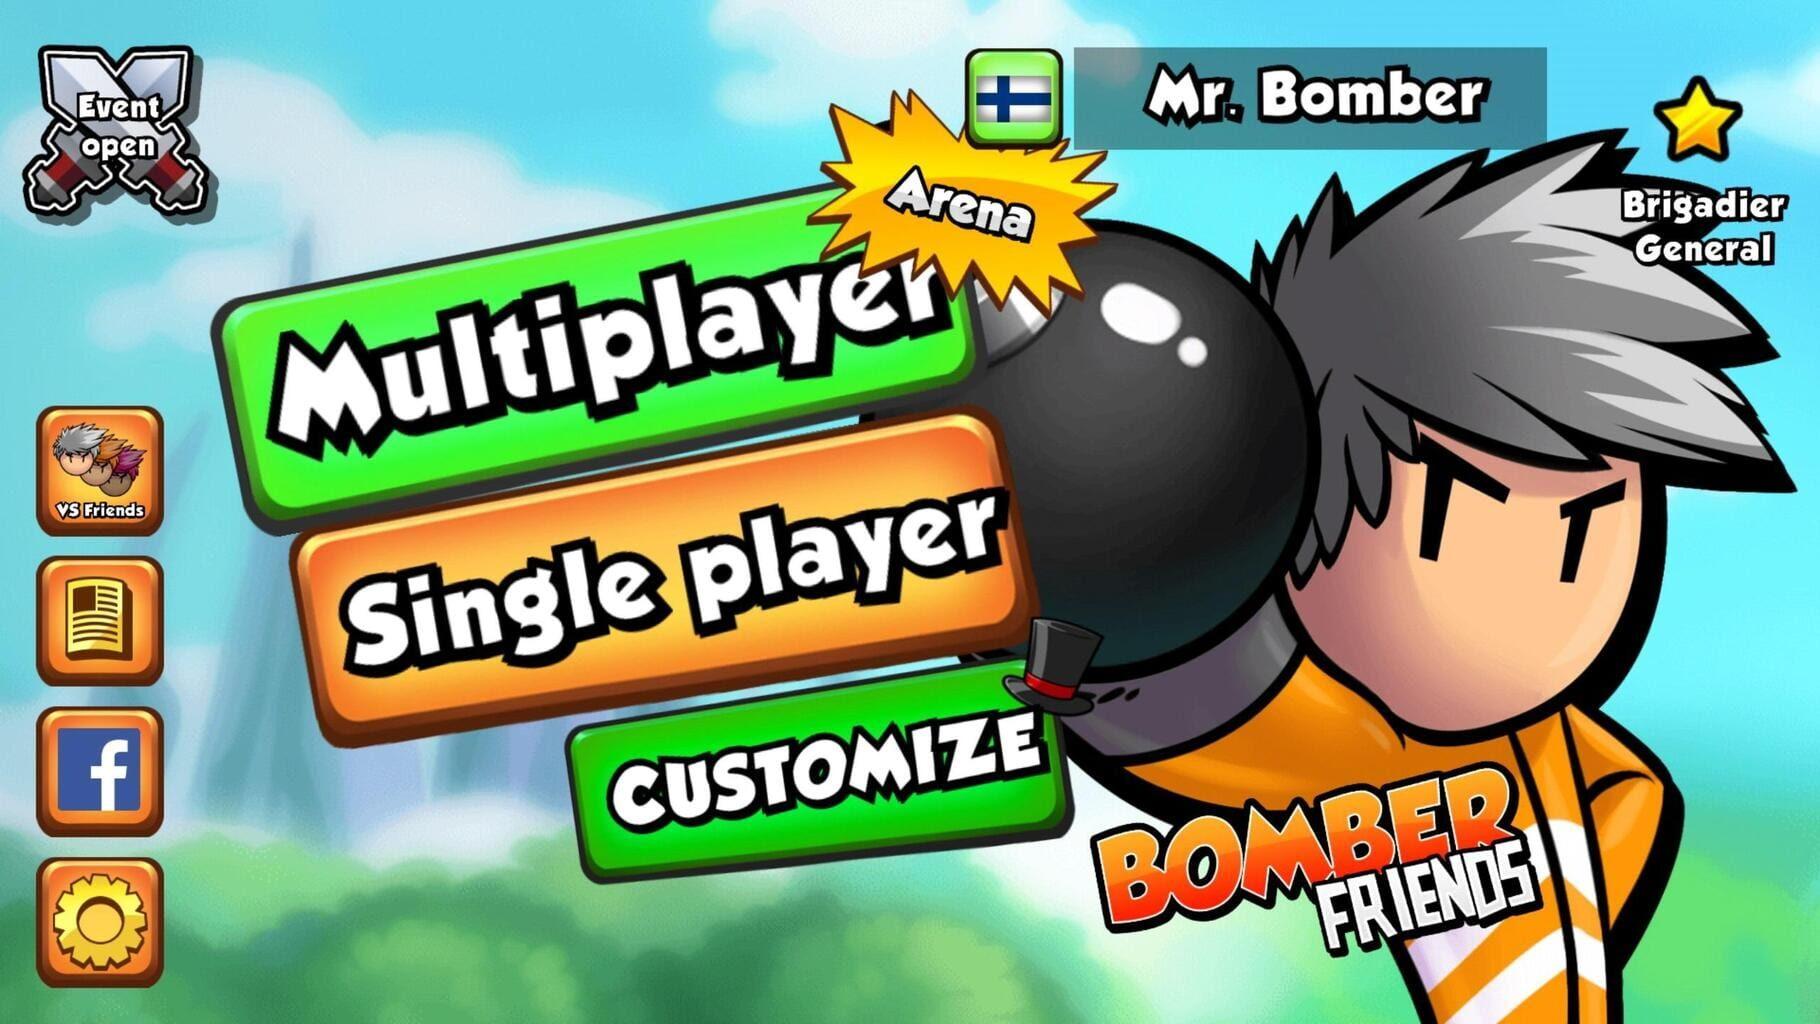 Bomber Friends 2 Player: Play Bomber Friends 2 Player